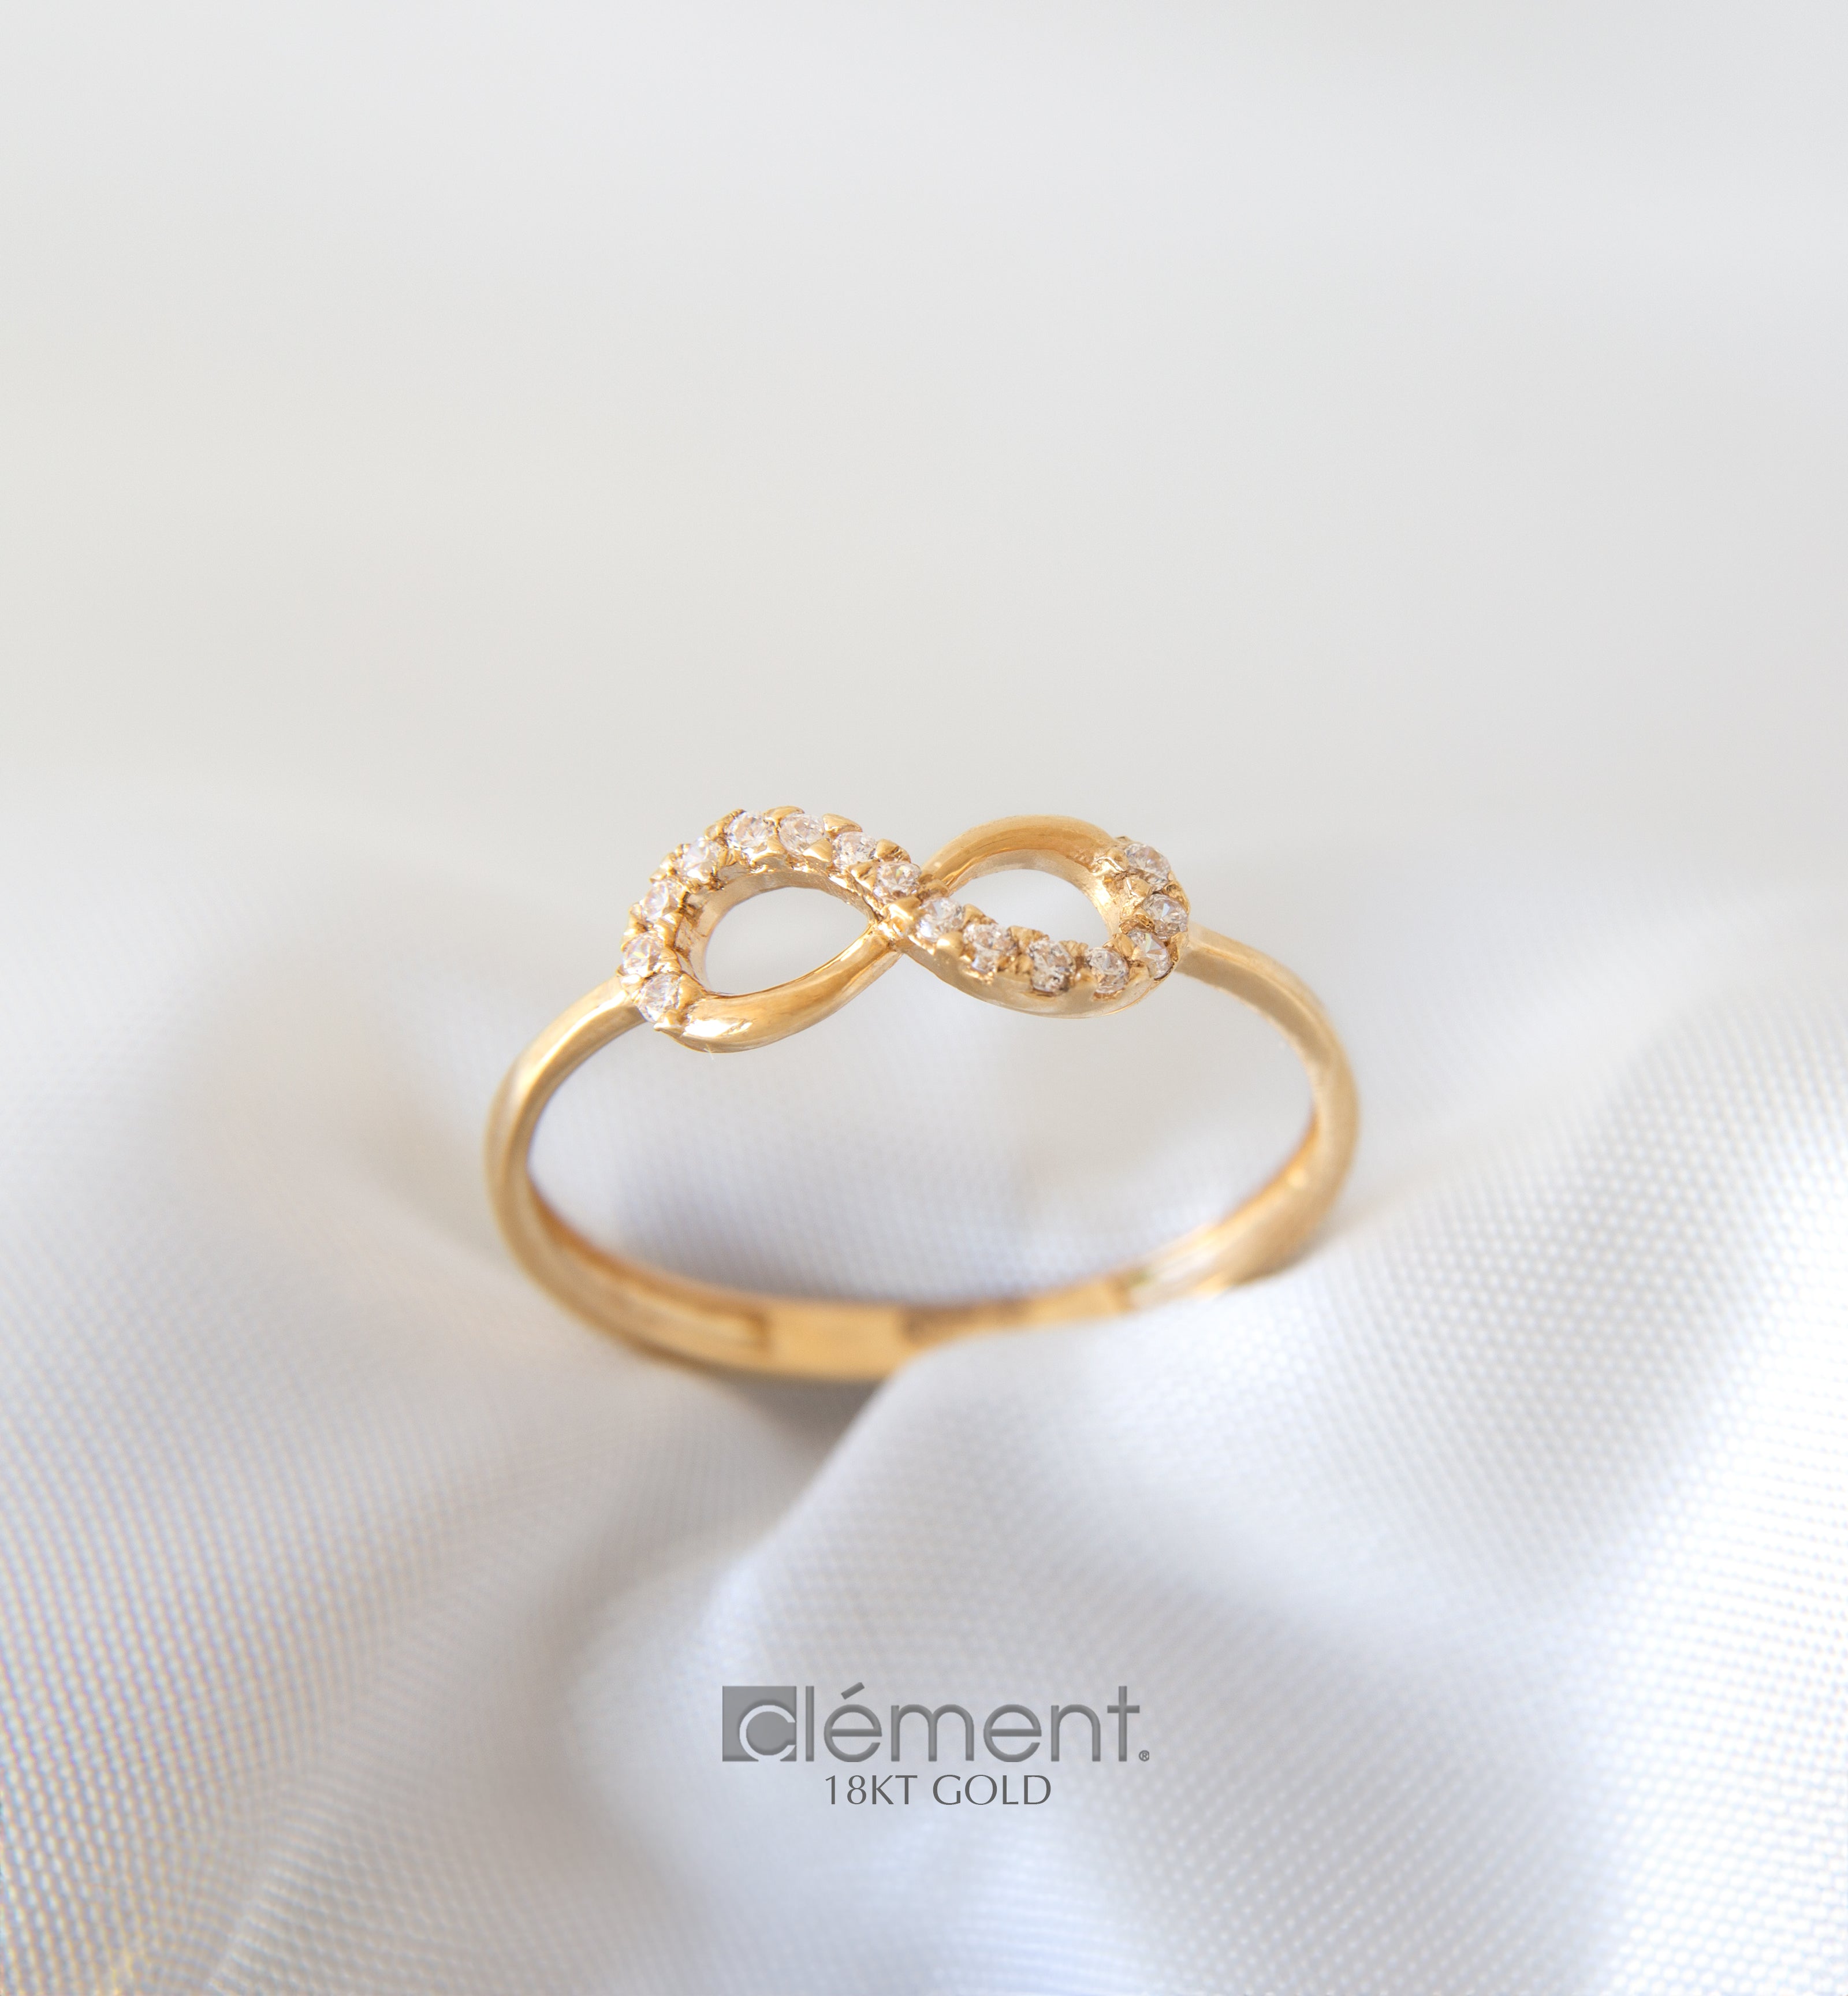 18ct Gold Infinity Ring with CZ Stones